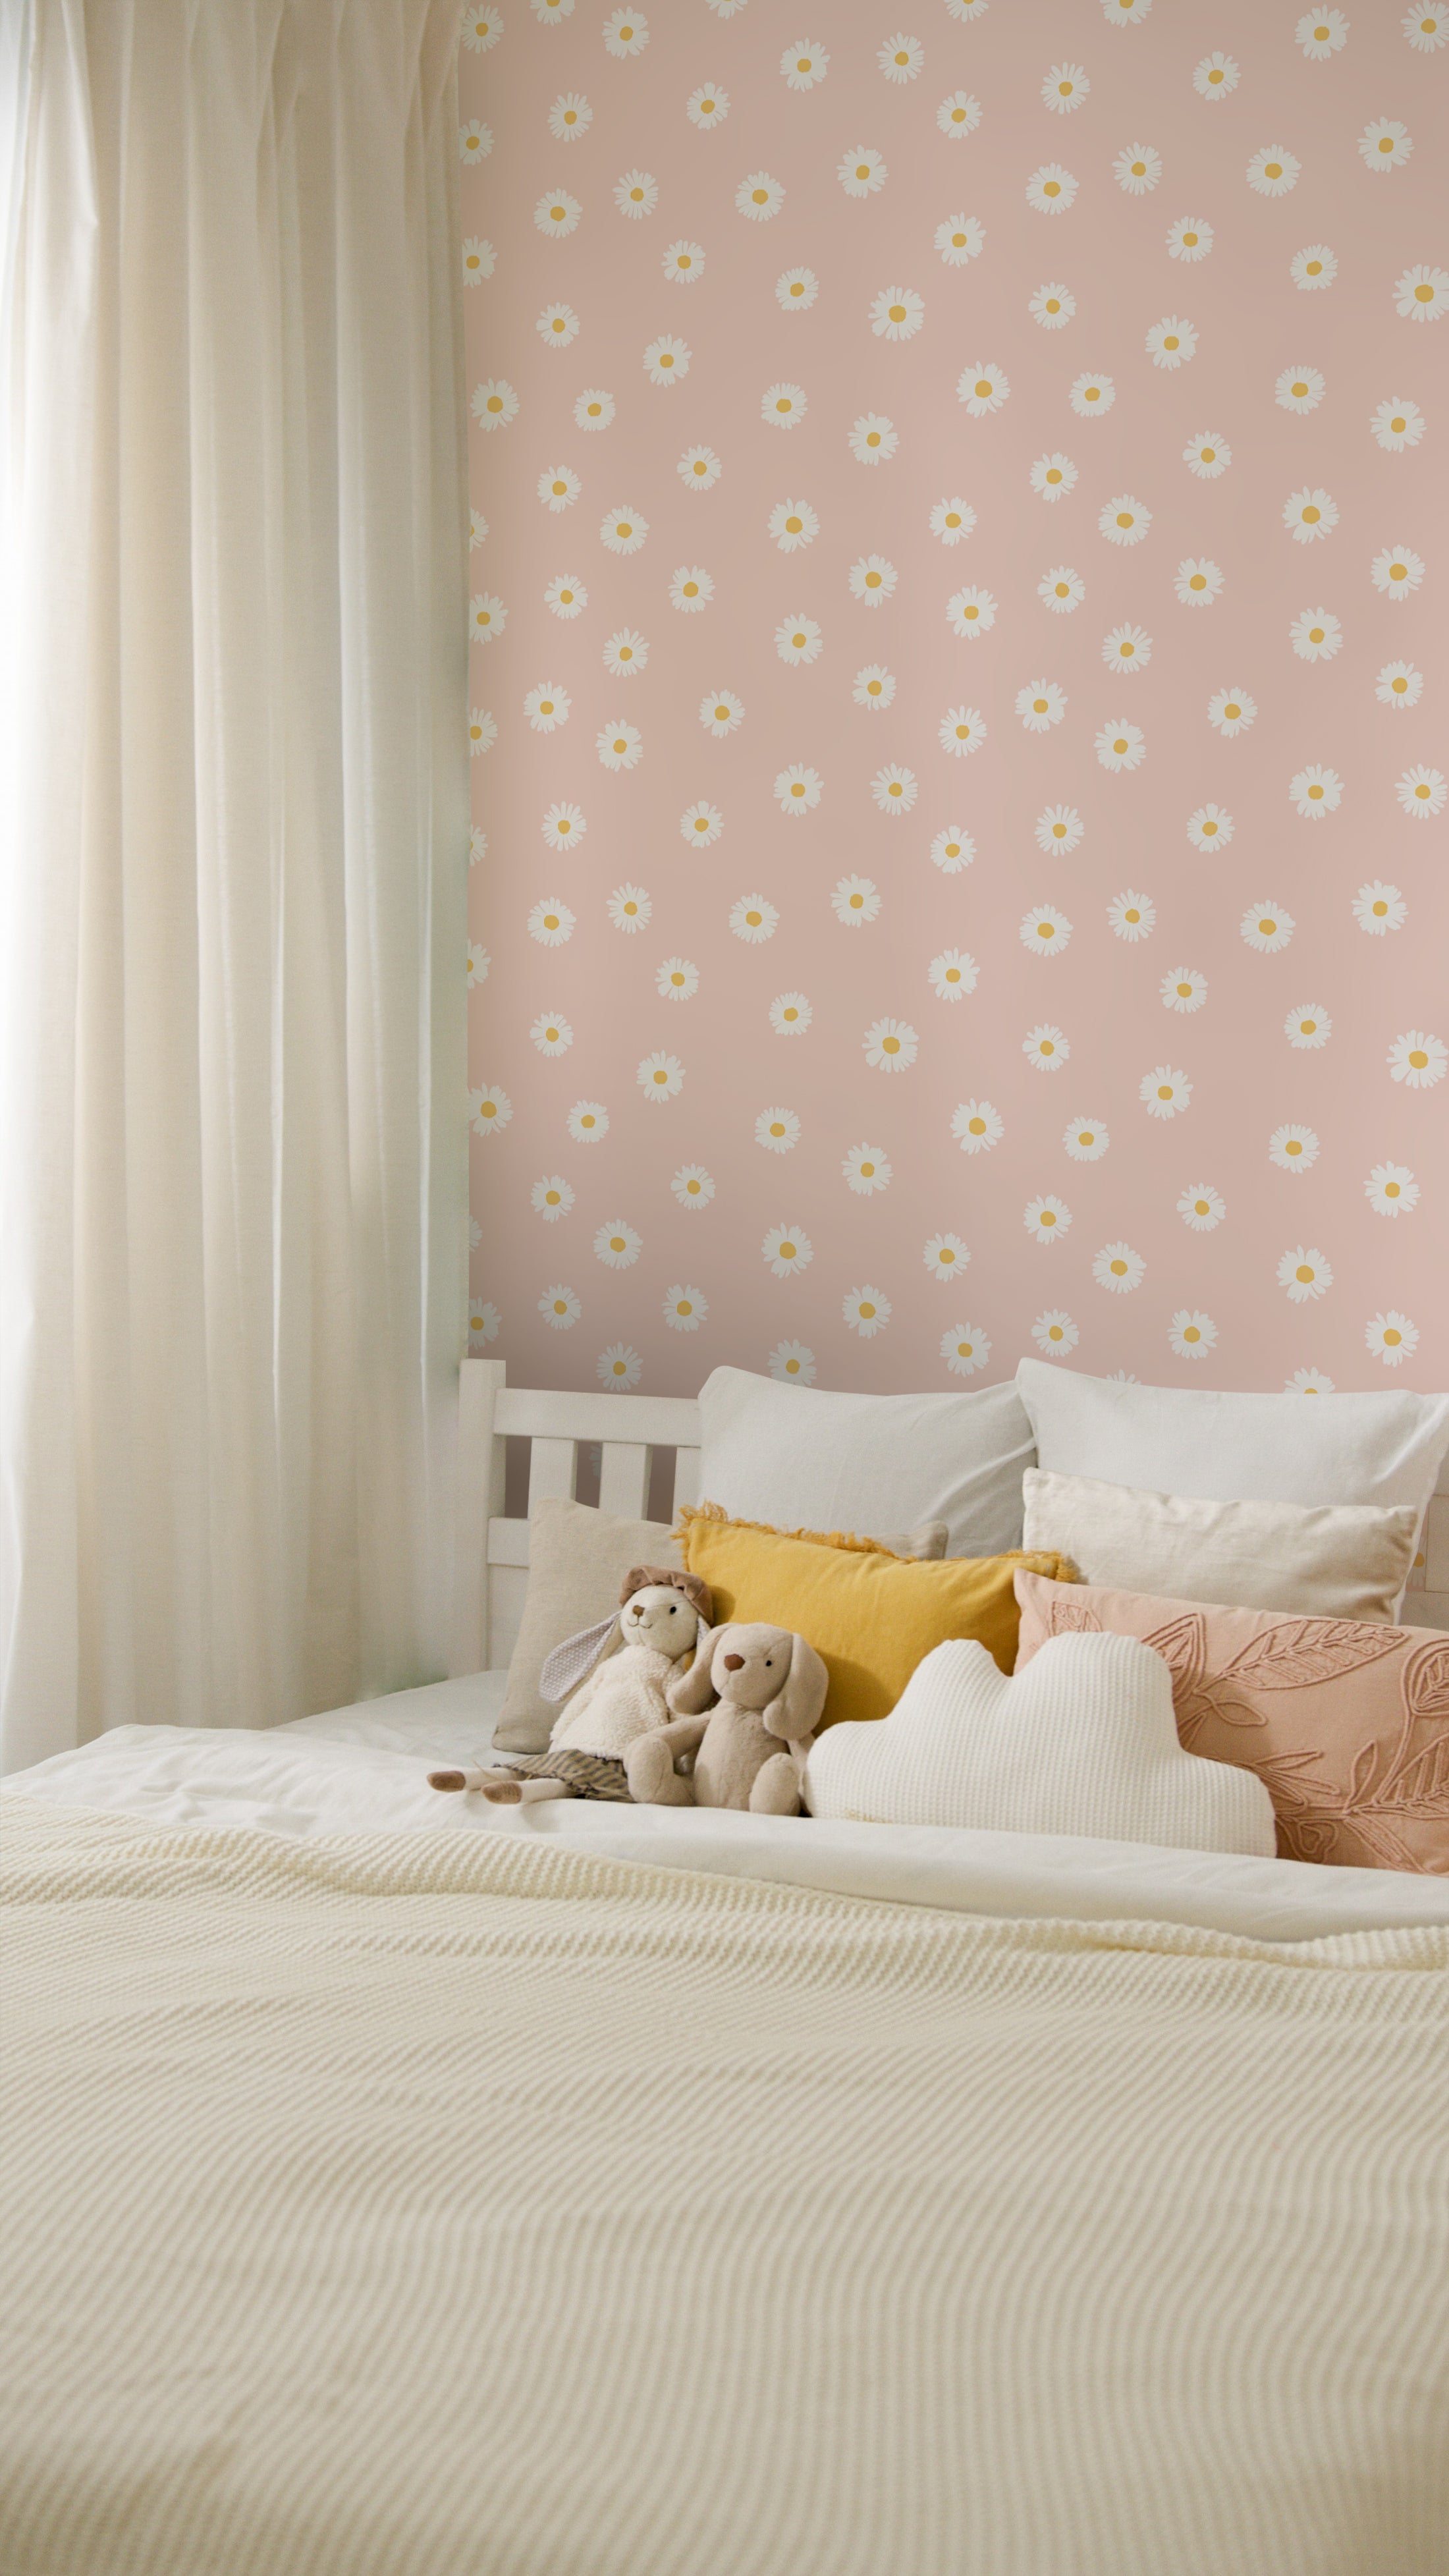  A children’s bedroom featuring the Daisy Daze Wallpaper in a soft peach tone decorated with white daisies. The room includes a bed with white bedding, several plush toys, and cushions, creating a warm and inviting atmosphere. The wallpaper adds a delightful and fresh look to the room, perfect for a child's space.